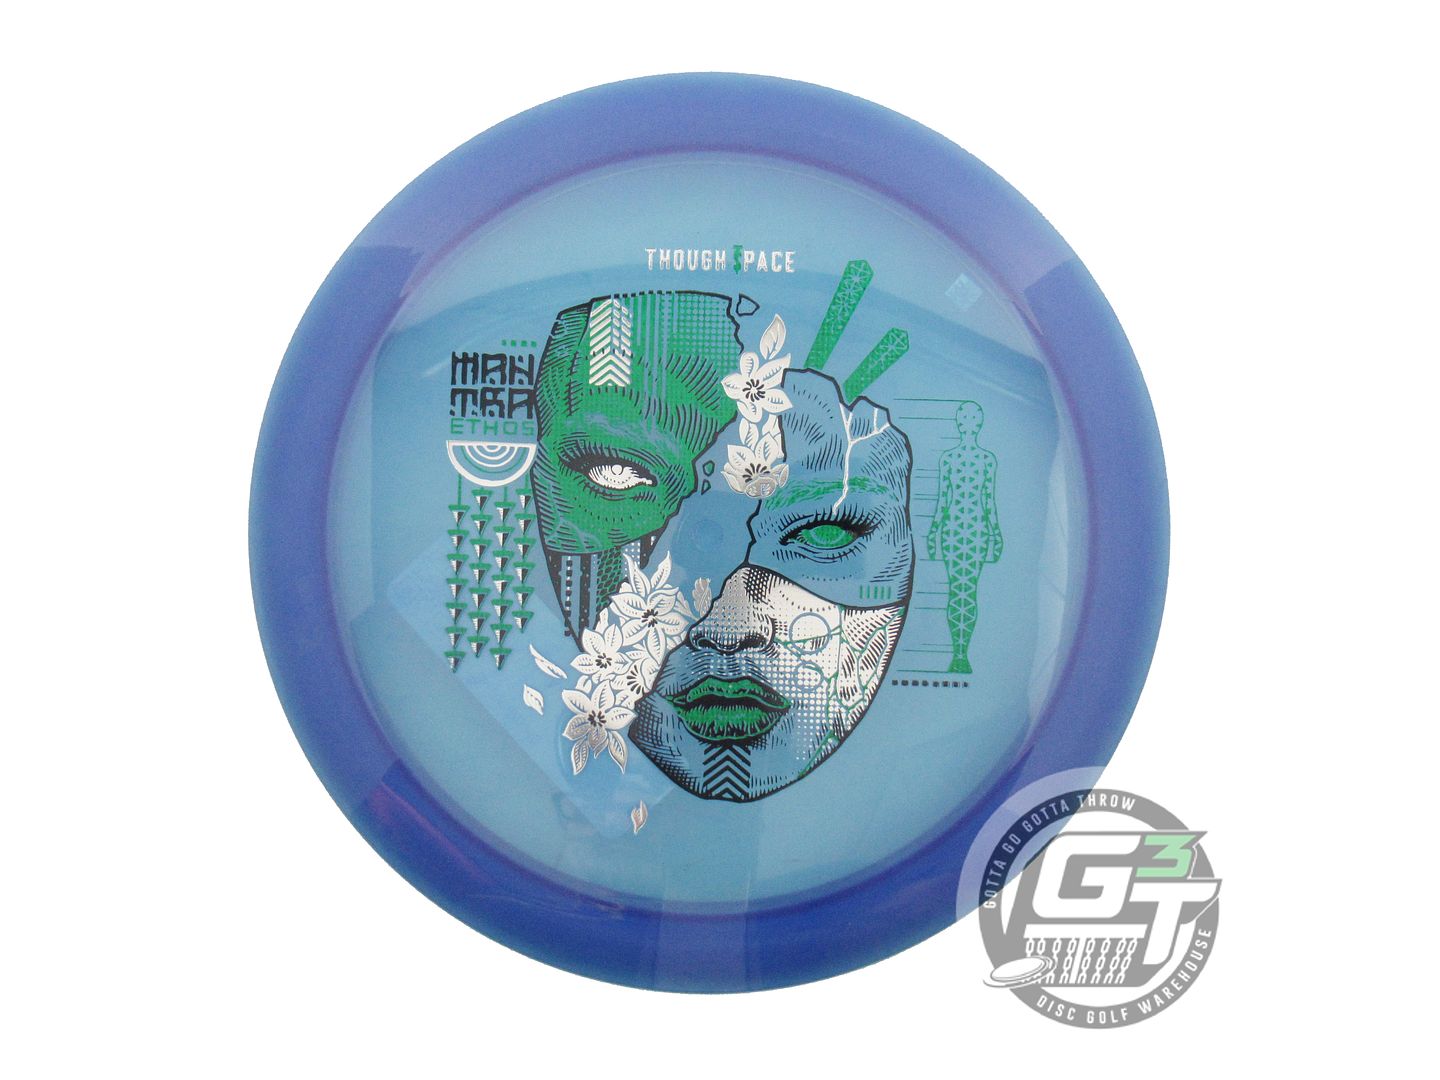 Thought Space Athletics Ethos Mantra Fairway Driver Golf Disc (Individually Listed)